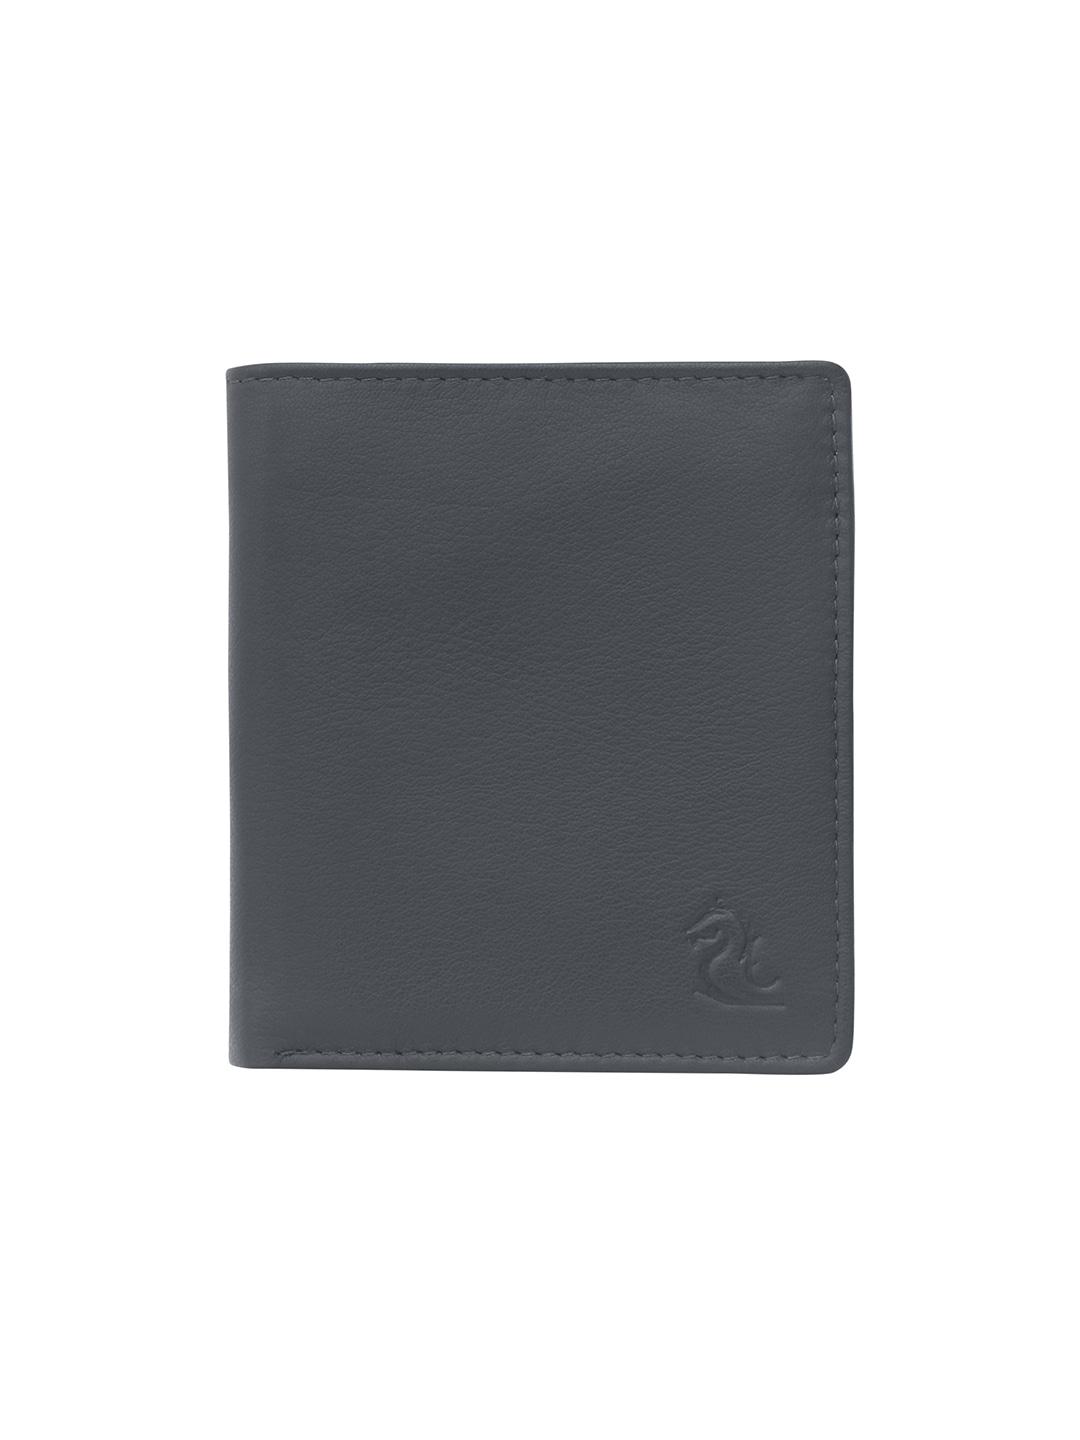 Black Leather Two Fold Wallet